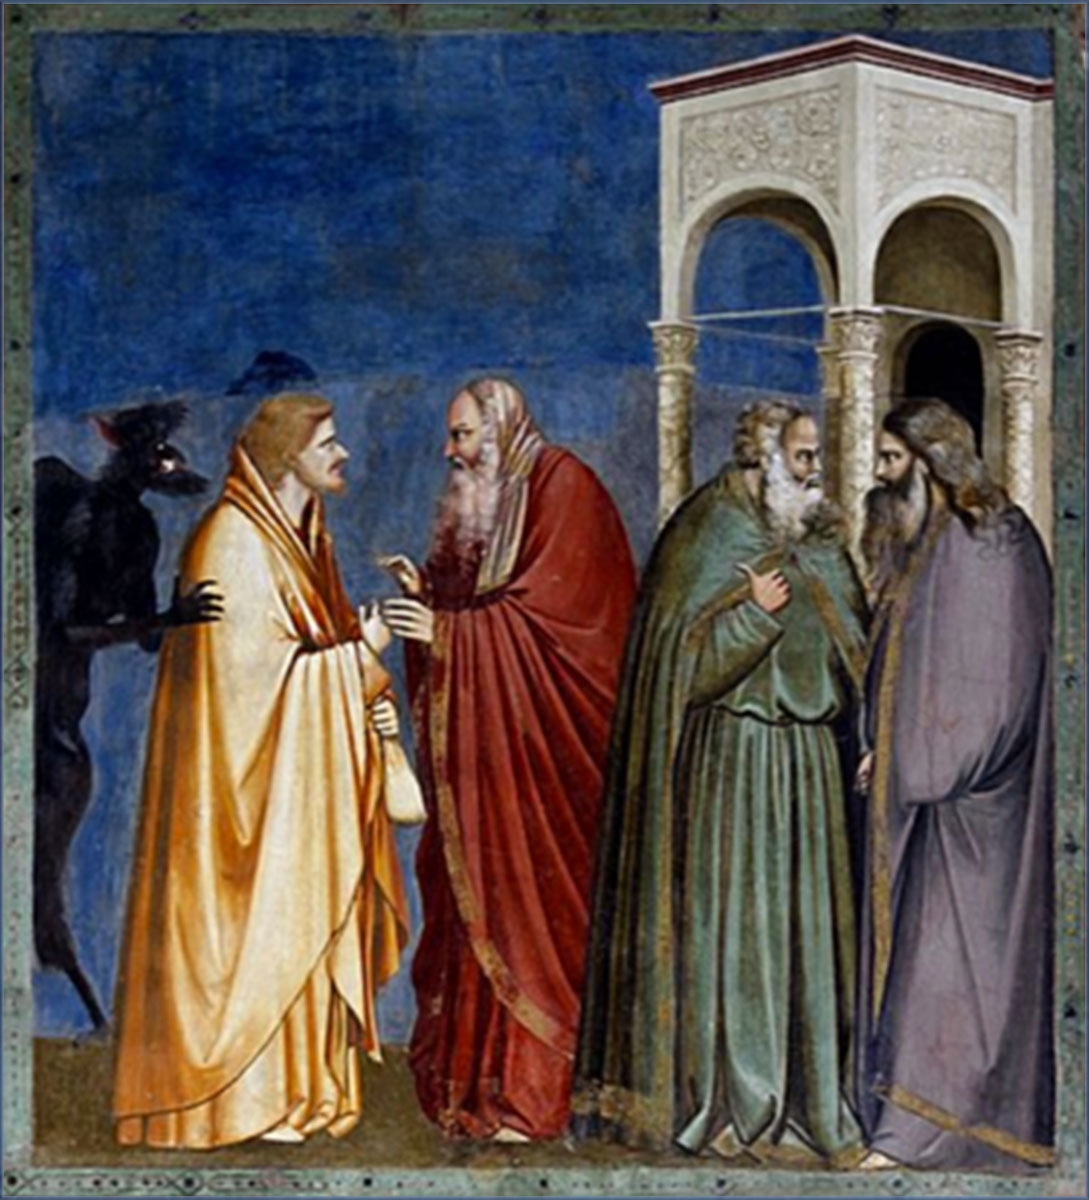 Judas receives payment for betrayal (Giotto, Scrovegni Chapel, 1304-1306)